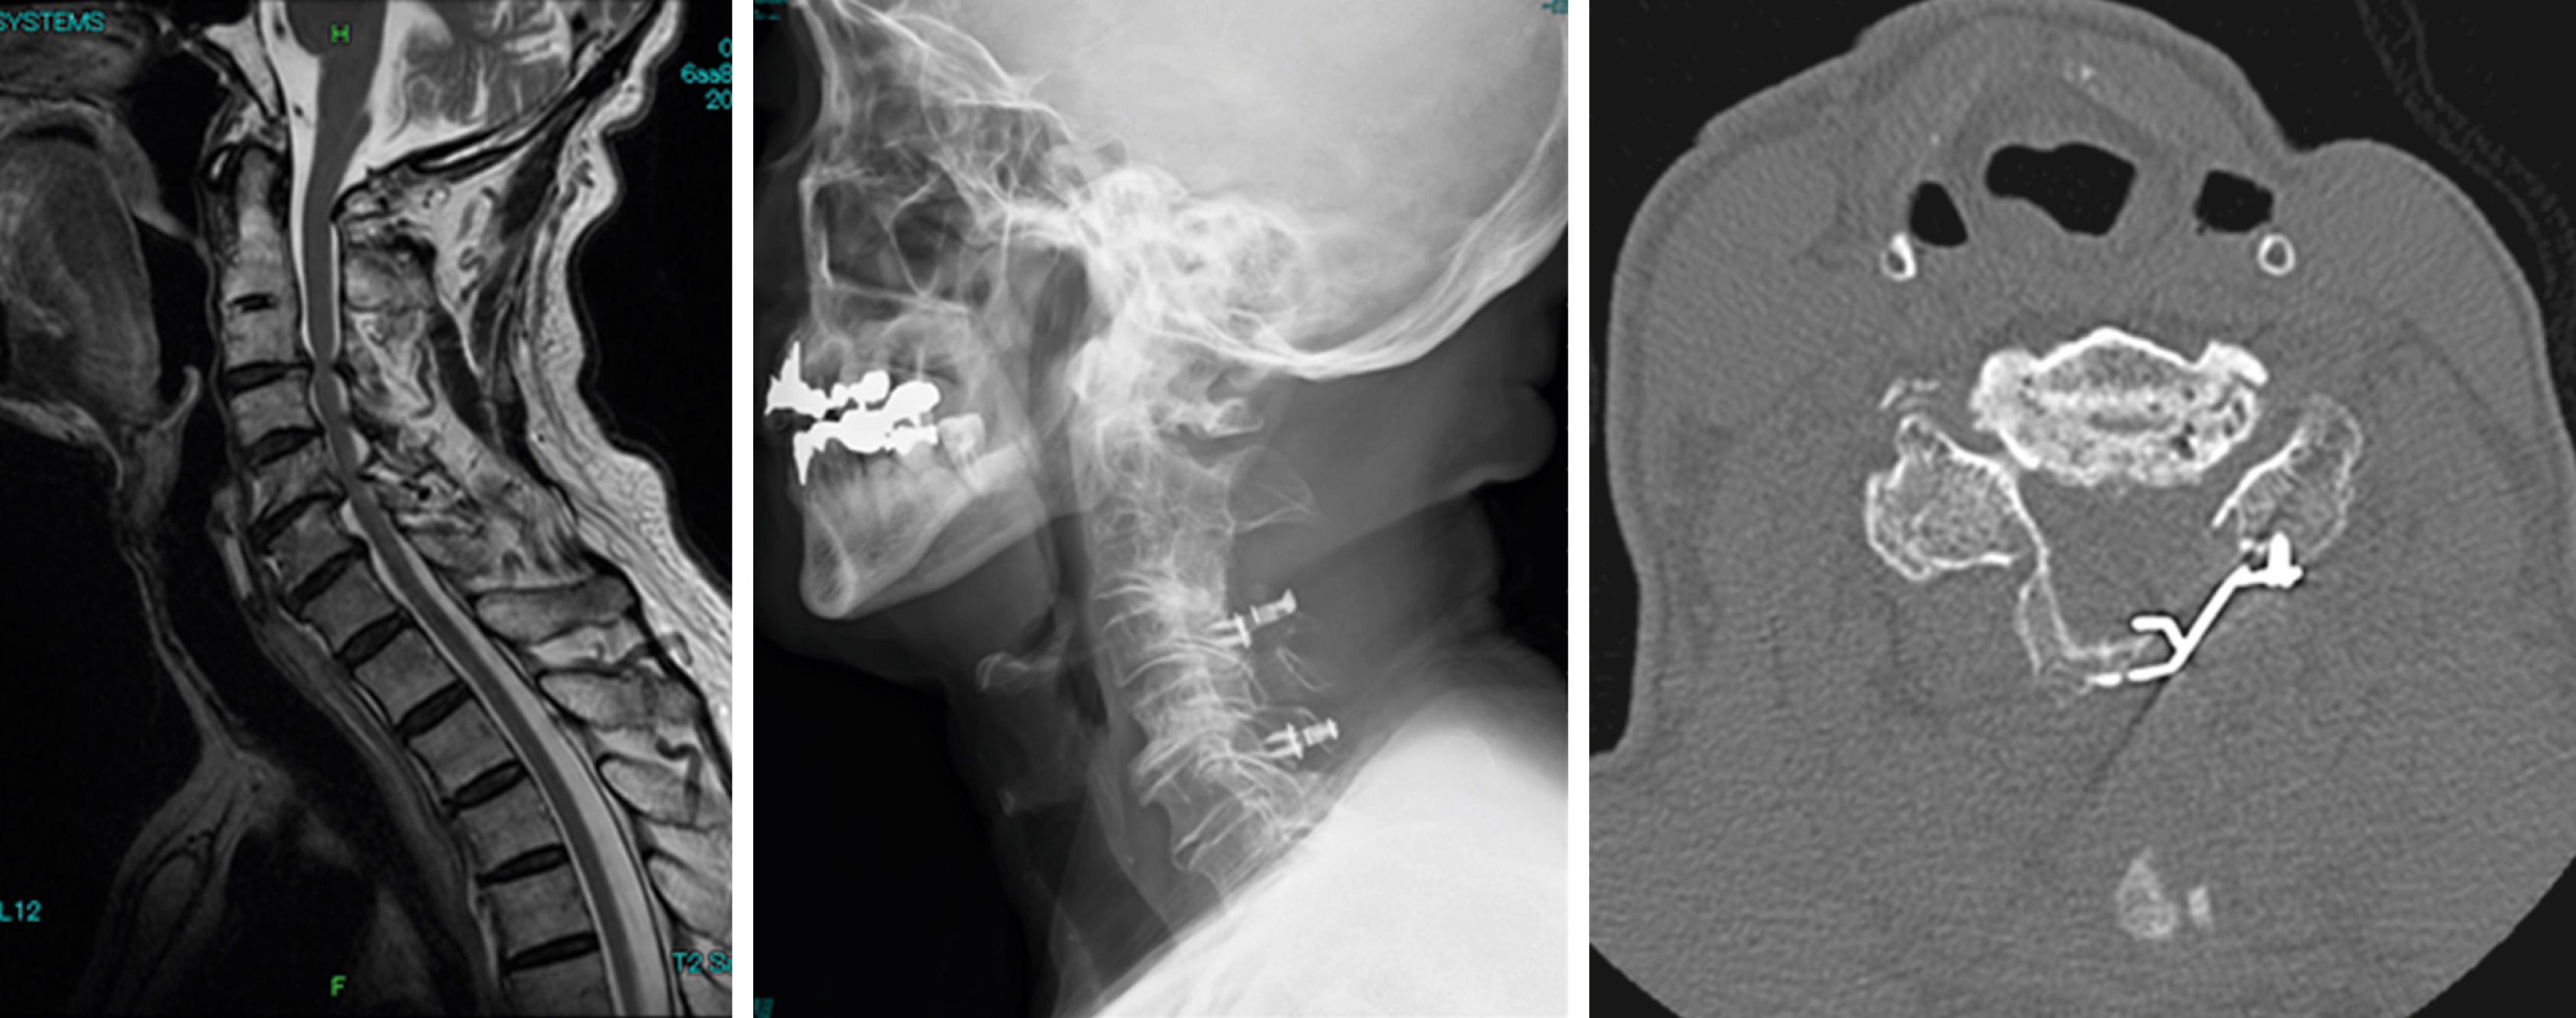 Fig. 106.1, A patient with cervical spondylotic myelopathy who underwent laminoplasty. Axial computed tomography image of the expanded spinal canal space created by inserting a laminar plate.